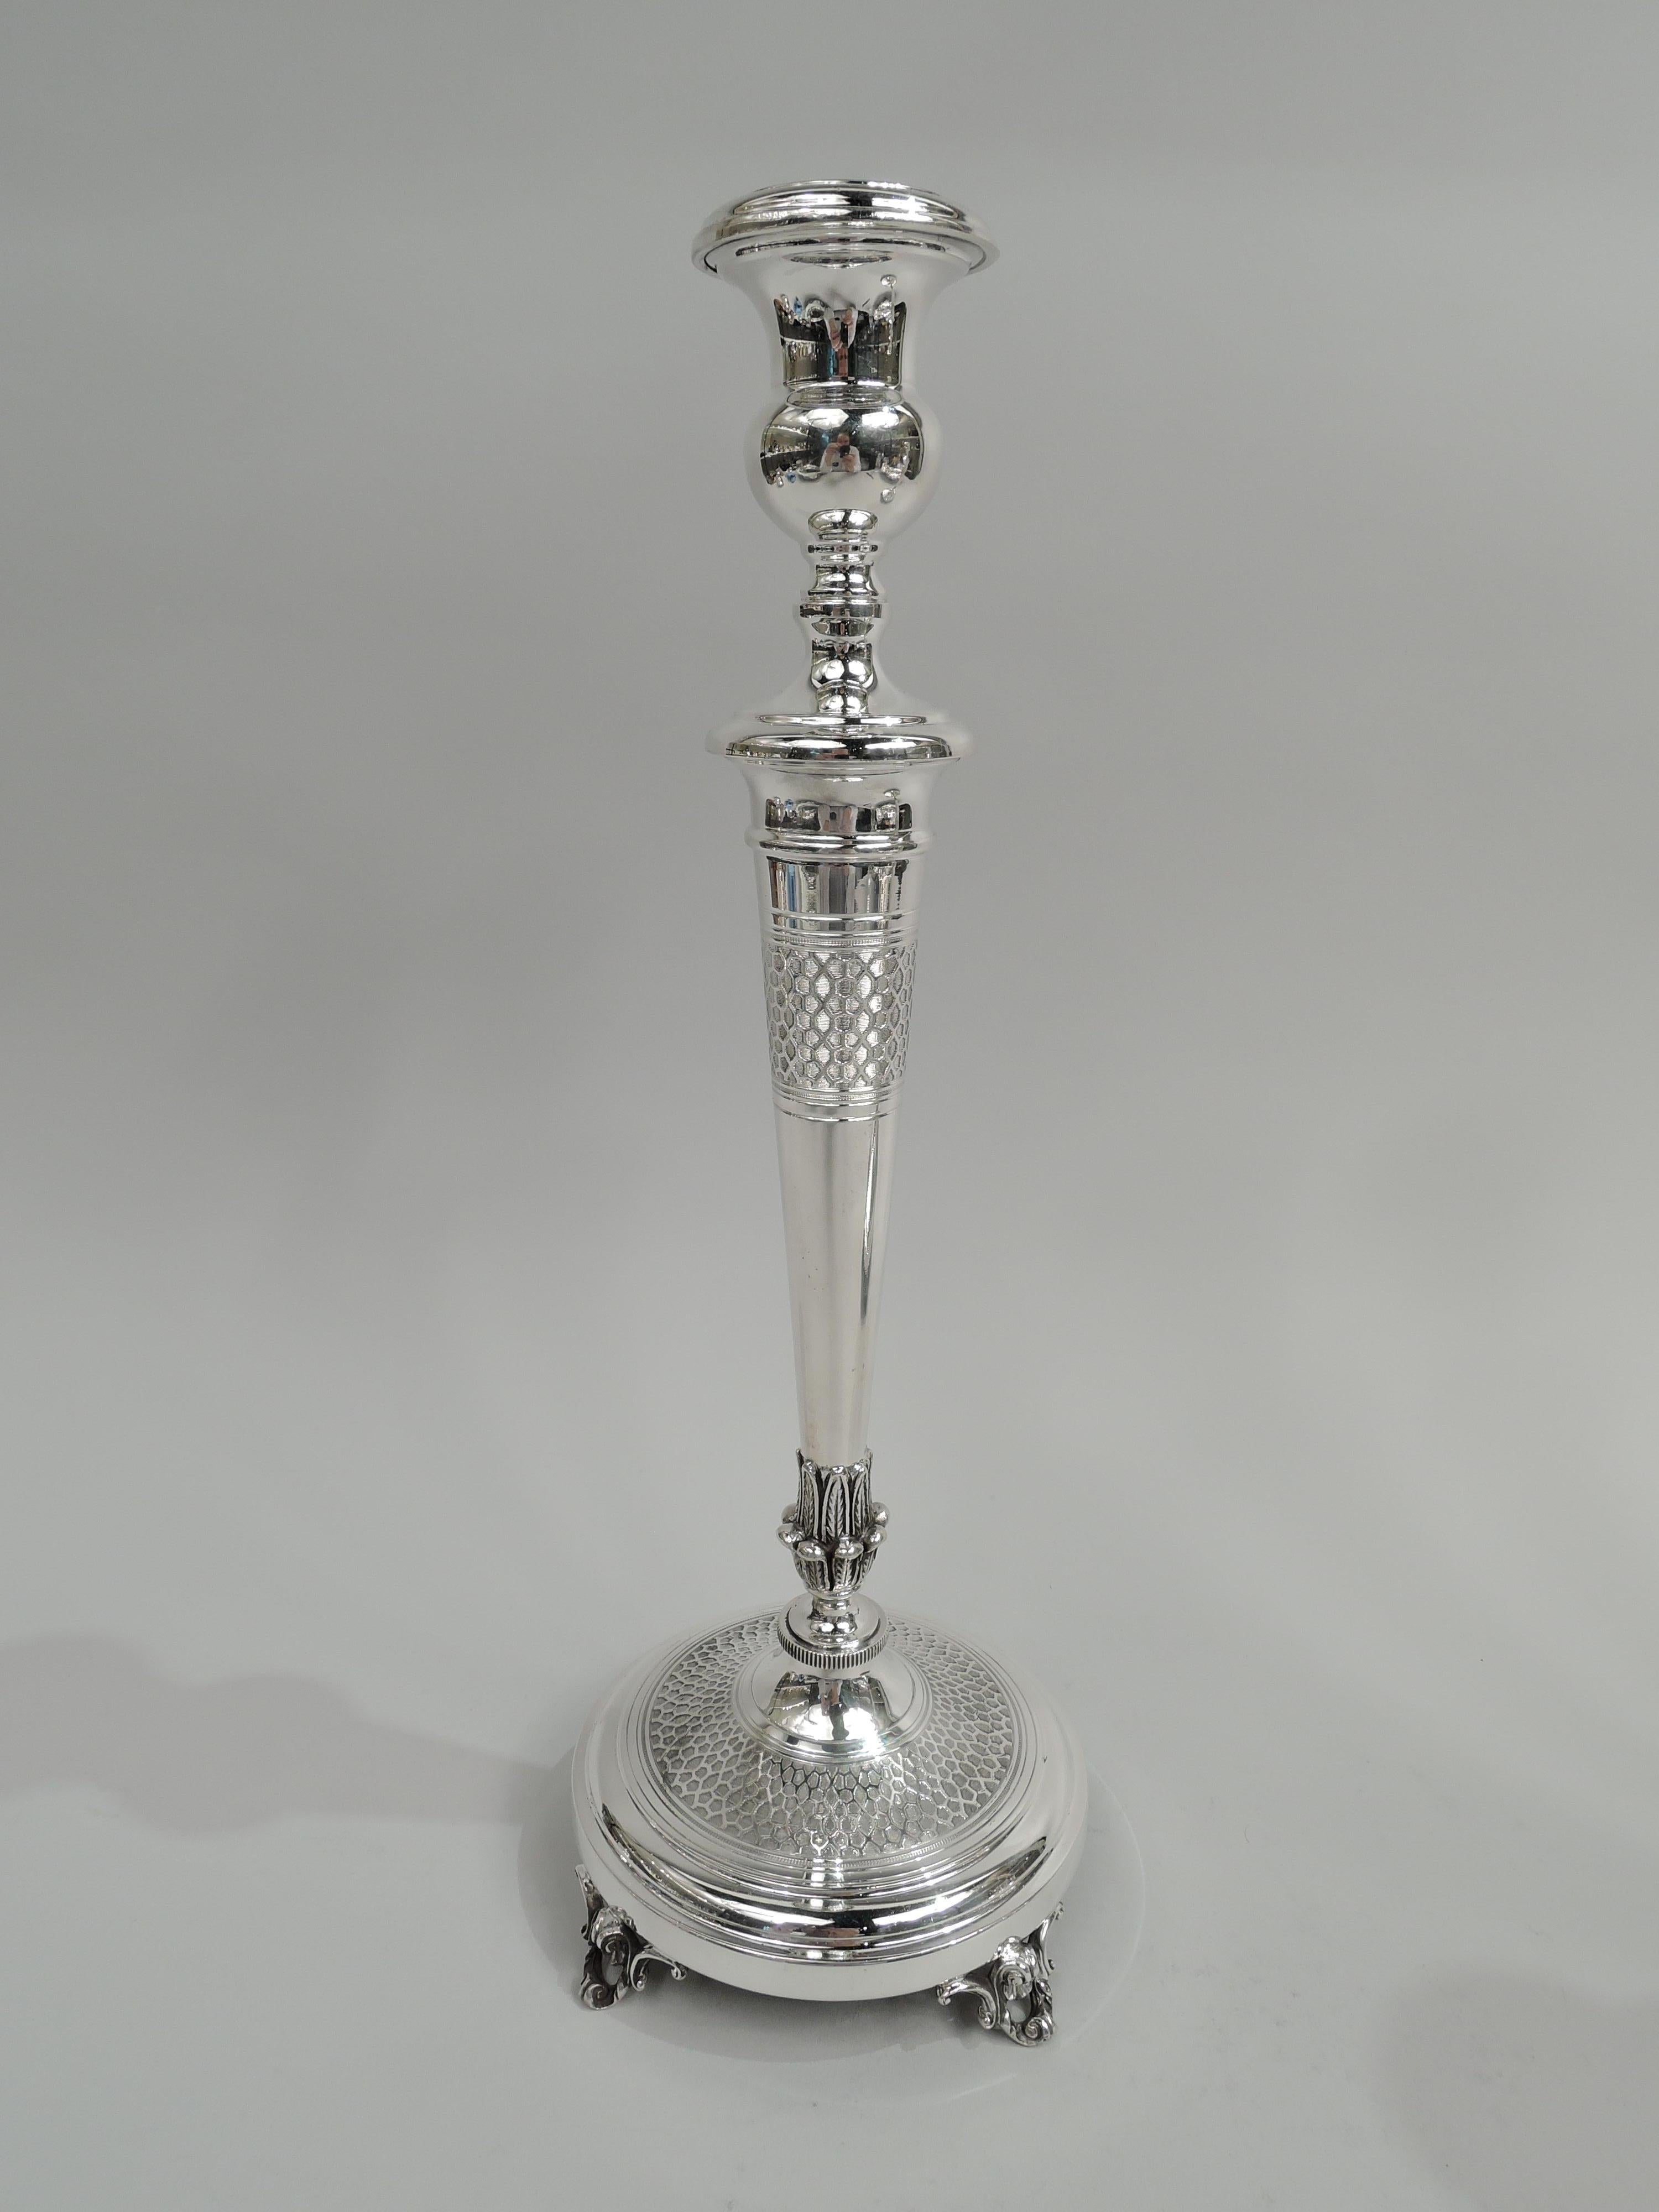 Pair of Modern Classical sterling silver candlesticks. Each: Bellied urn socket on tapering columnar shaft with applied acanthus leaves at base; ribbed knop on raised foot supported by four open leafing scroll supports. Acid-etched honeycomb band on